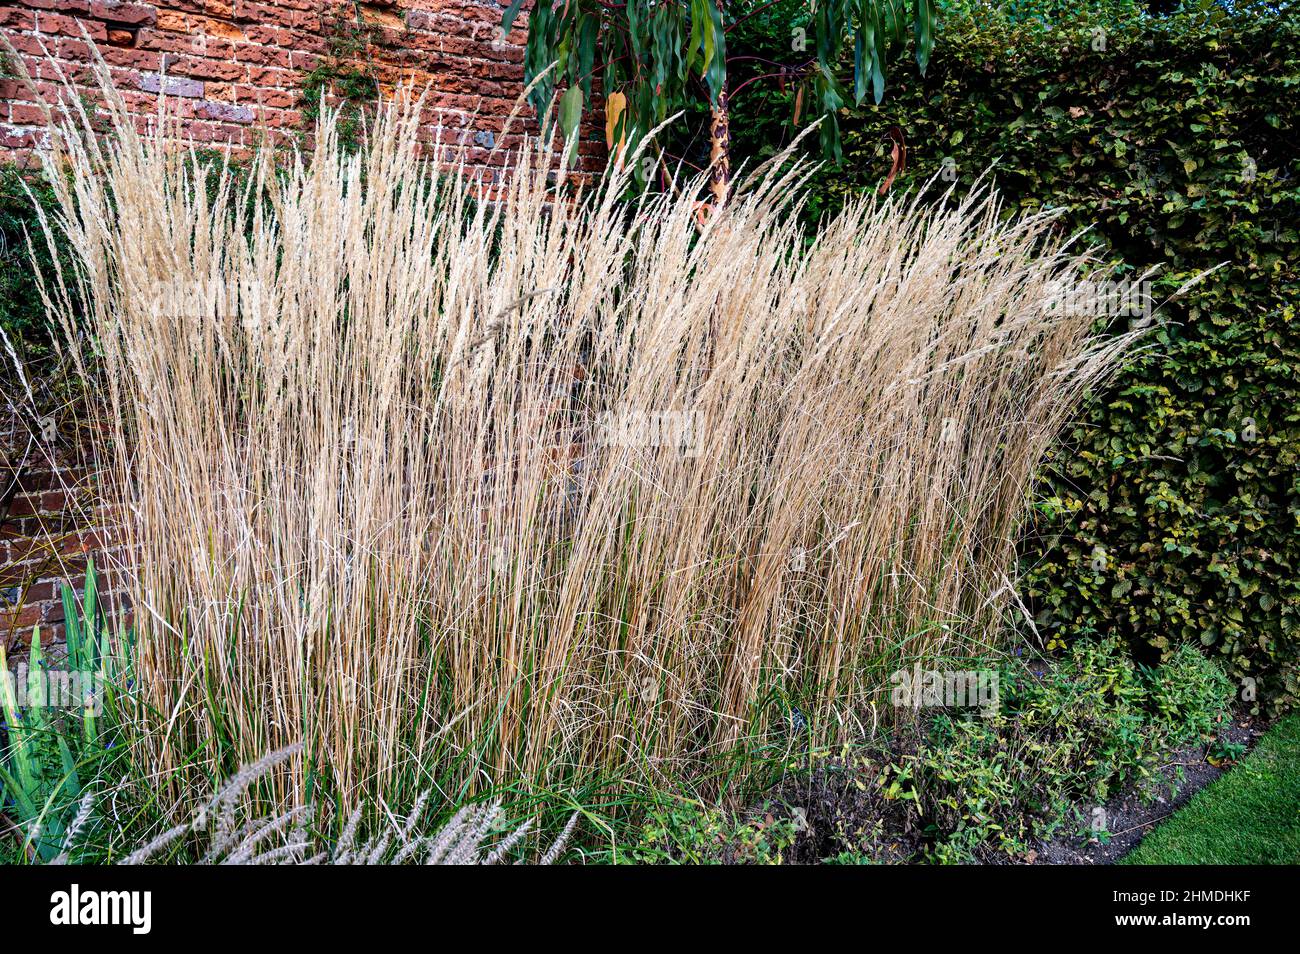 Calamagrostis acutiflora karl foerster, feather reed-grass, poaceae.Providing height and structure in tha late summer garden. Stock Photo